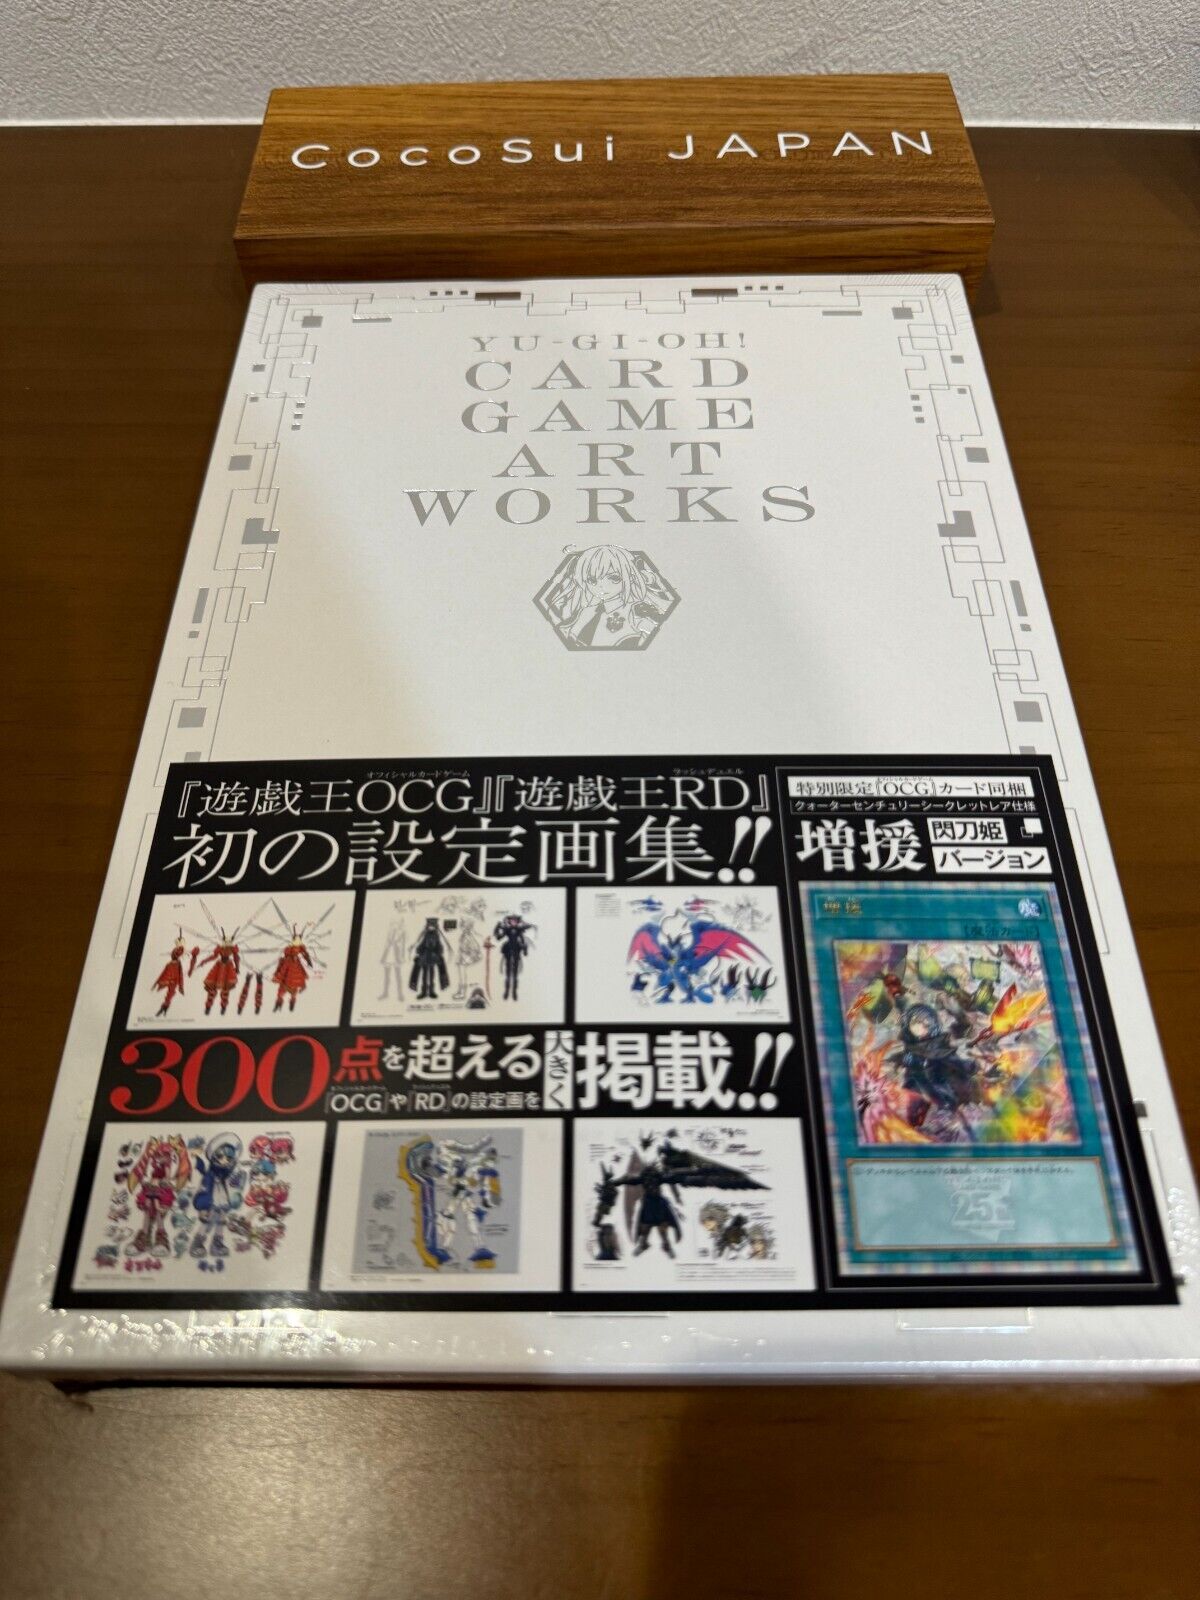 YU‐GI‐OH CARD GAME ART WORKS 25th Anniversary Art Book With CardSky Striker Ace